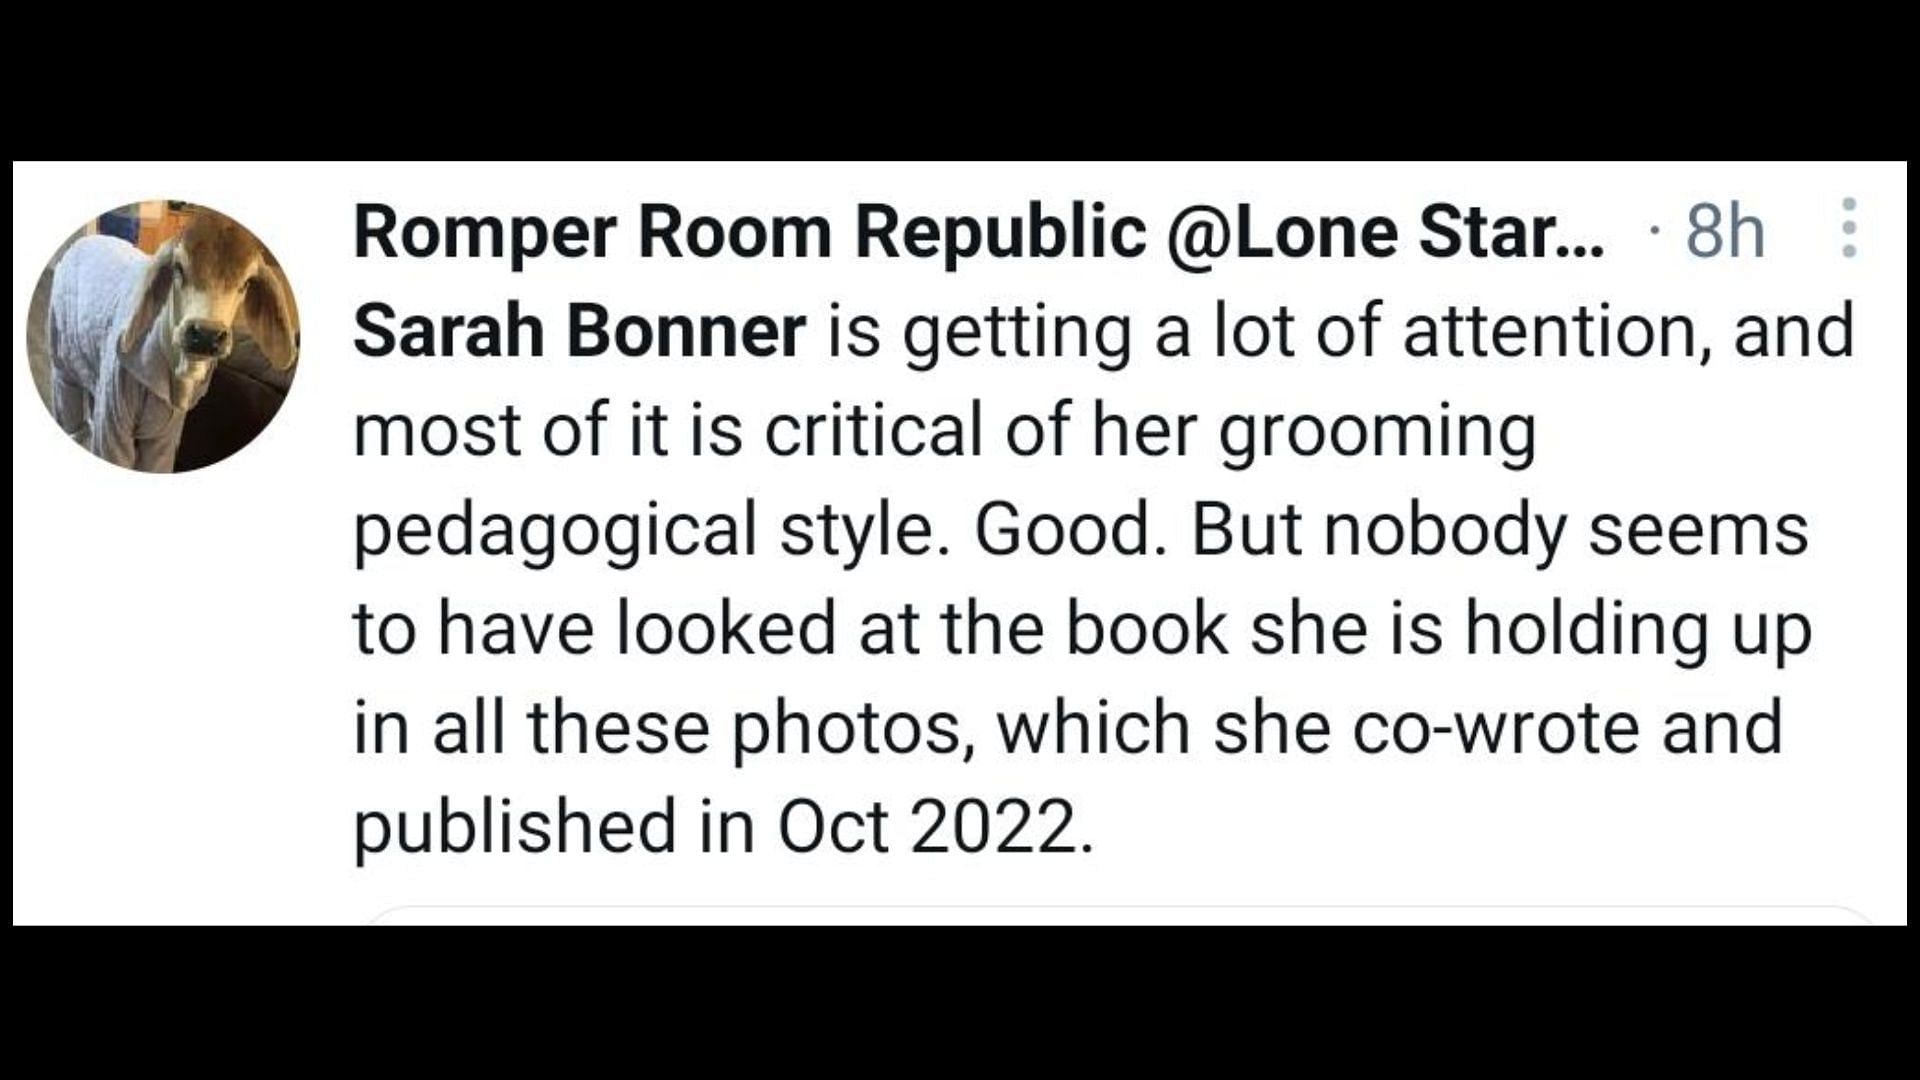 Bonner has been a teacher for several years now, (Image via Romper Room Republic @Lone Star Protester/Twitter)